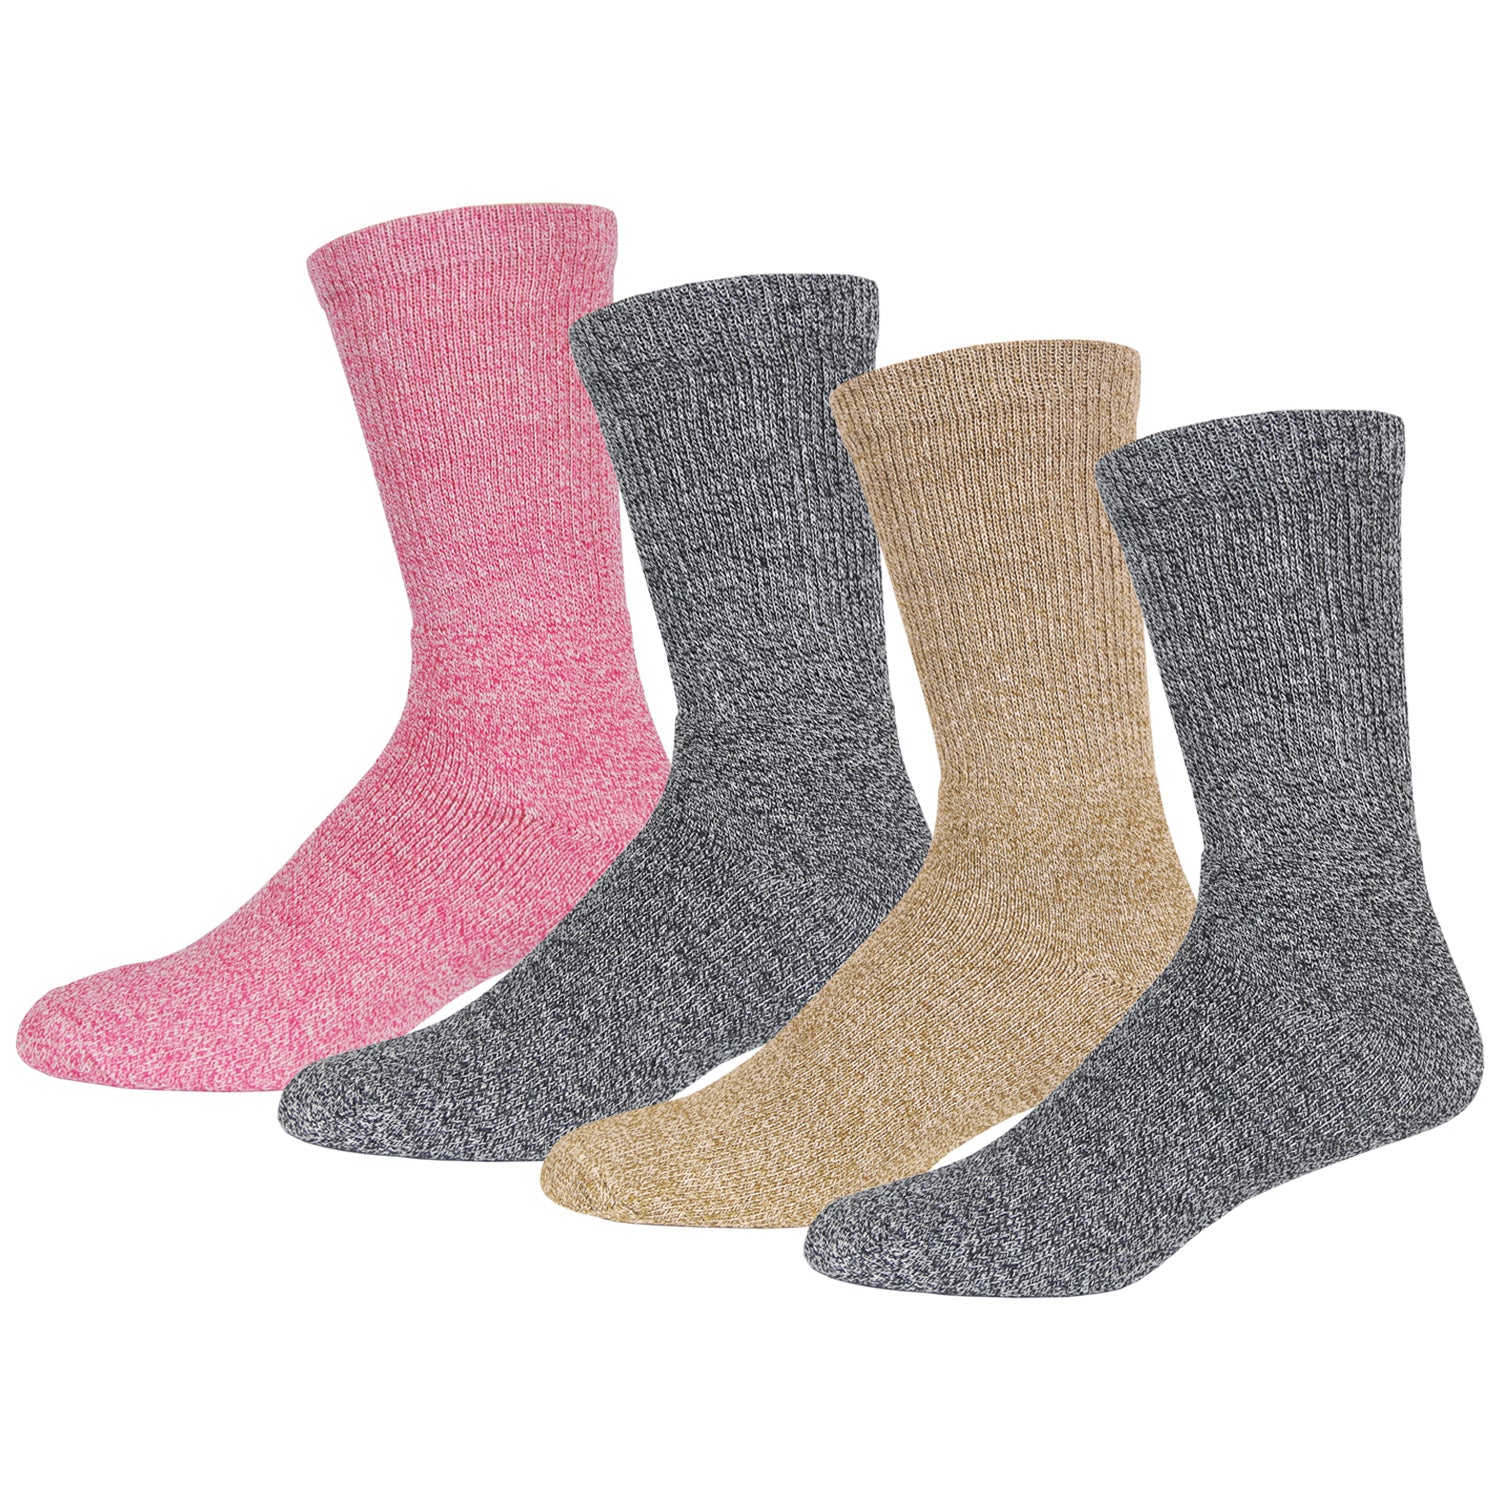 Debra Weitzner Thermal Socks Merino Wool For Men and Women - Extra-Warm  Winter Cold Weather Boot Socks (3 Pairs) at  Men's Clothing store